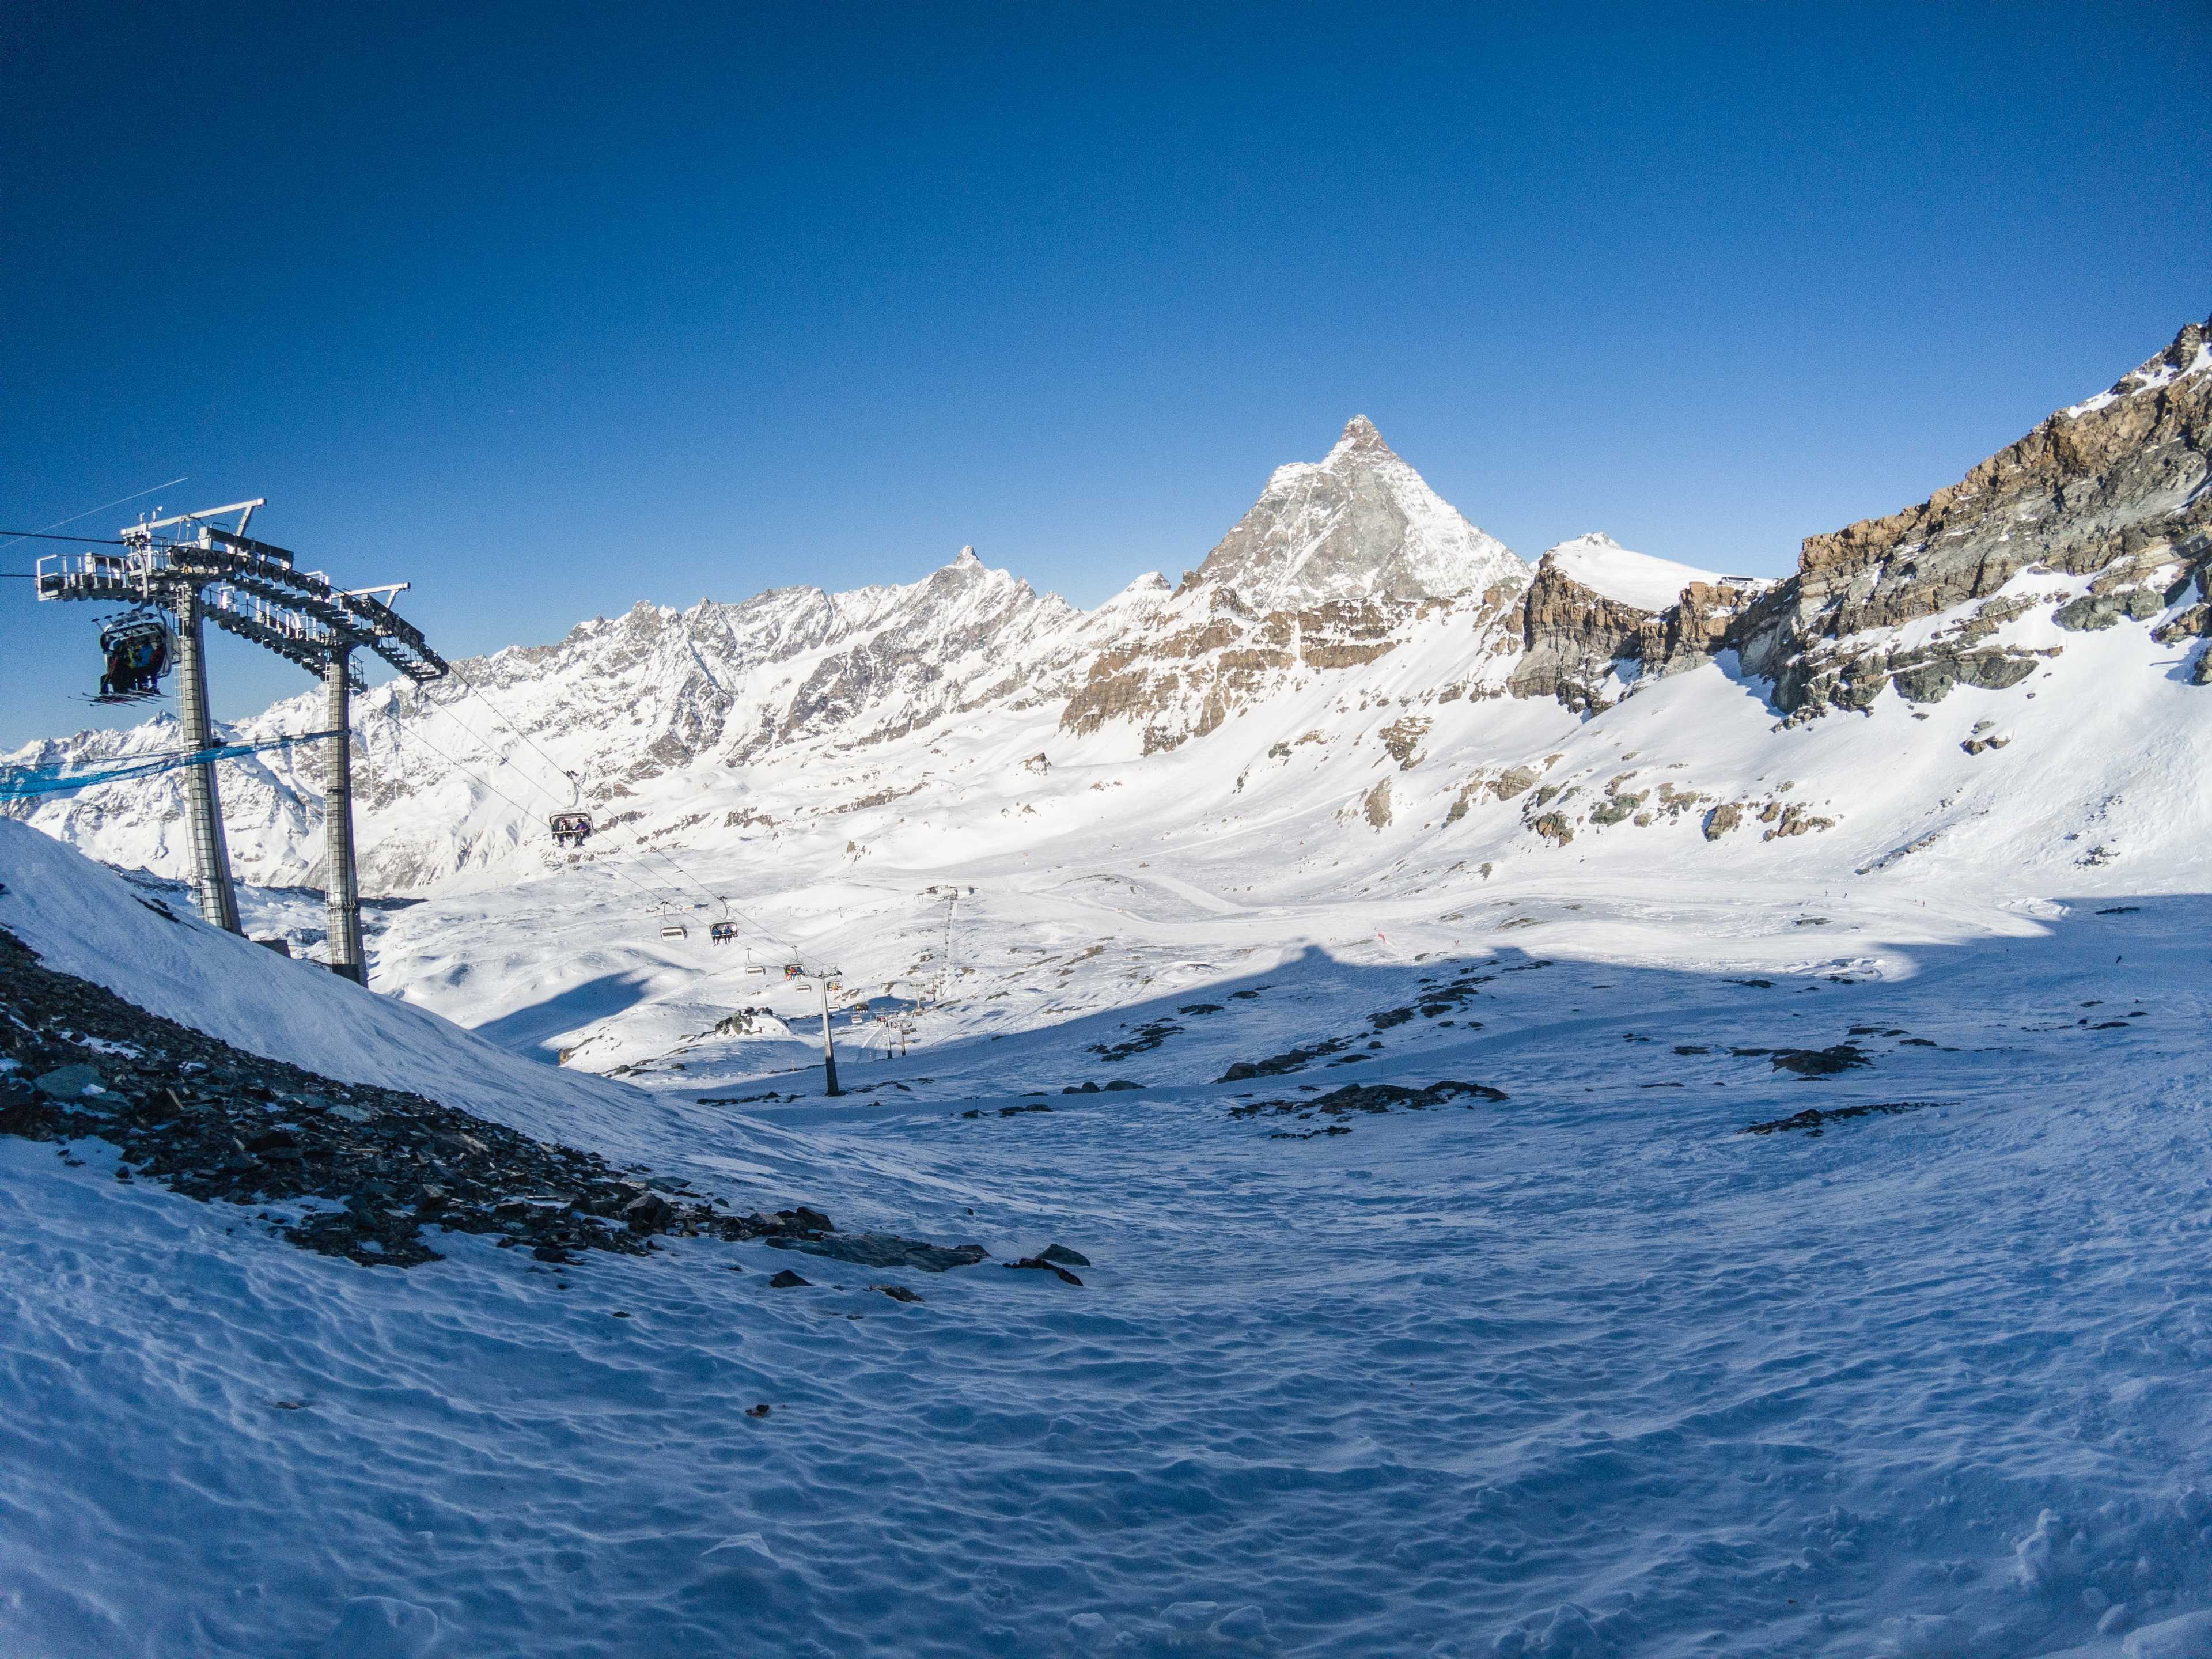 The view from Theodulpass (3301 m a.s.l.) towards Plan Maison, Cervinia